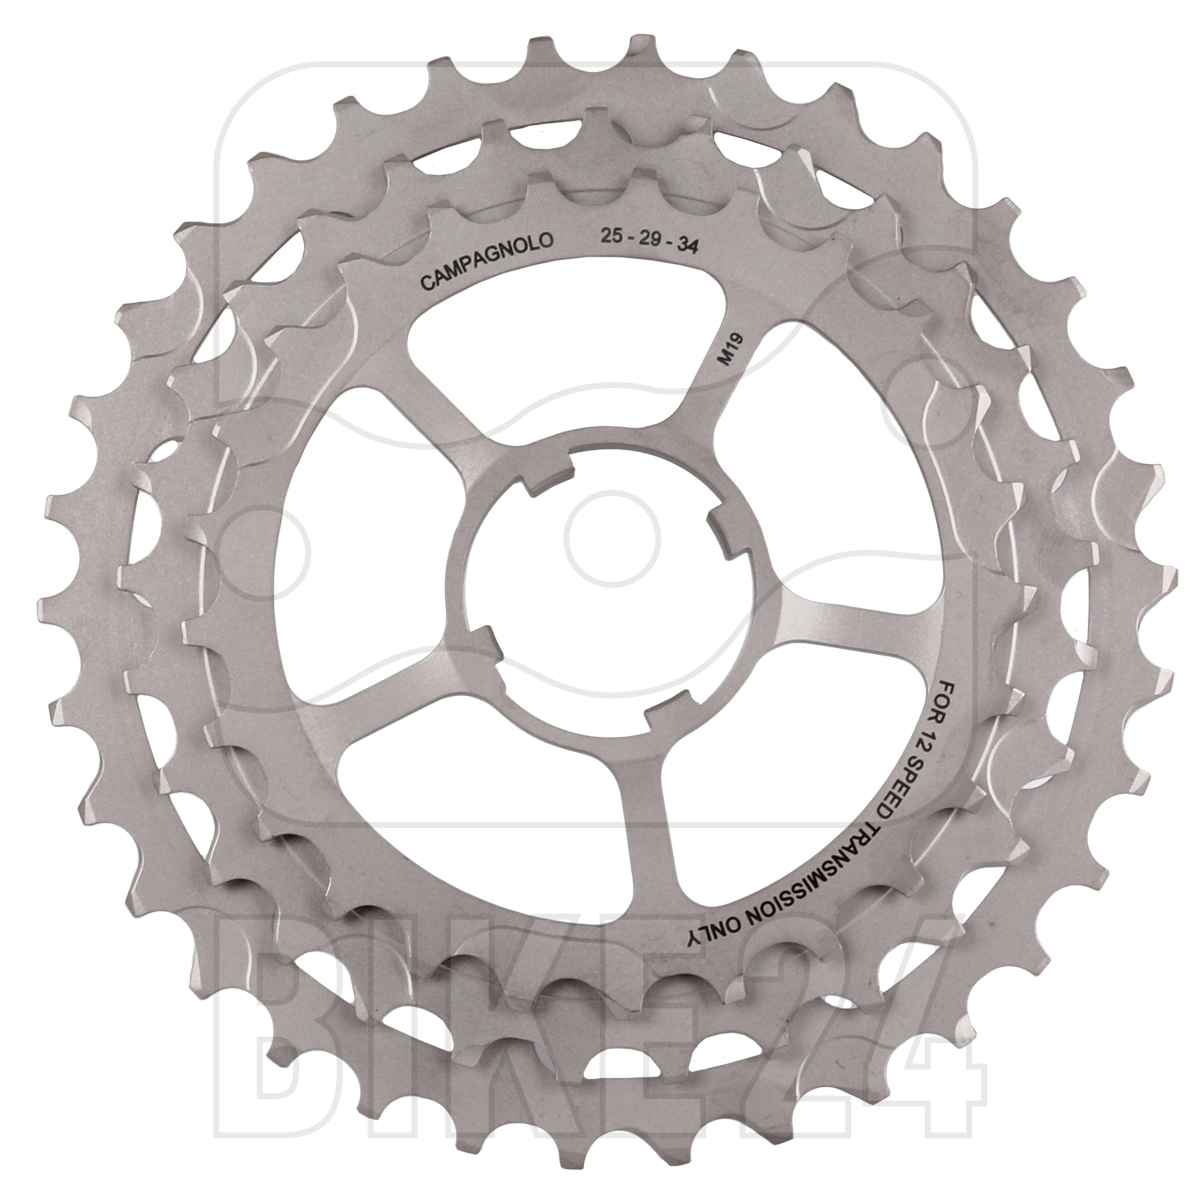 Picture of Campagnolo Sprockets for Super Record 12-speed Cassette - 25-29-34 Teeth - silver